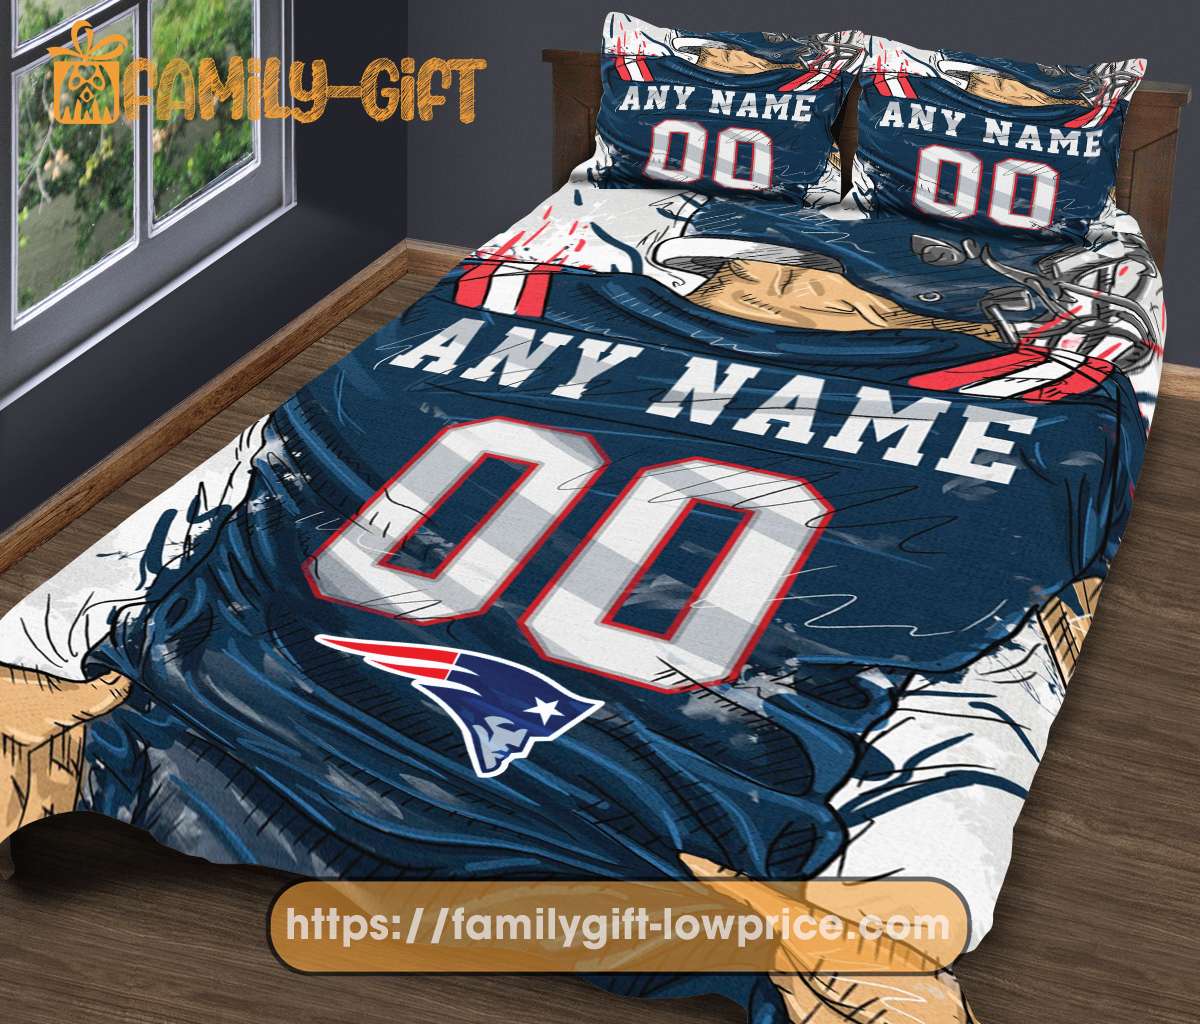 New England Patriots Jersey NFL Bedding Sets, Patriots Gifts, Cute Bed Sets Custom Name Number